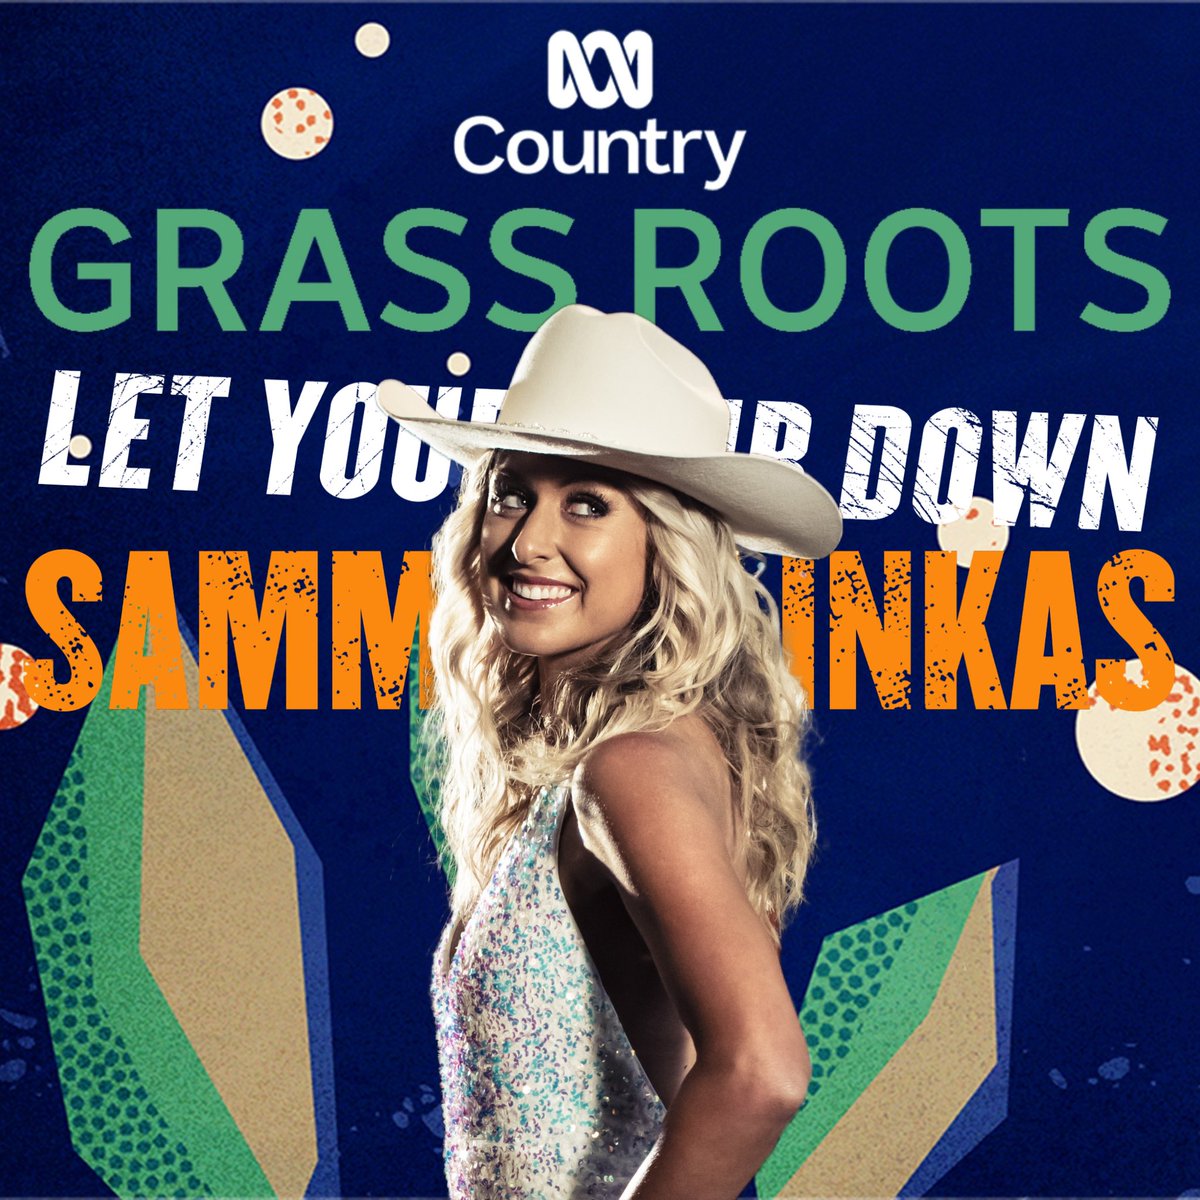 Bit late to the party on this one 🎶 Thanks so much to the team at @ABCCountry for featuring “Let Your Hair Down” on Grass Roots last week ❤️🤠 #country #countrymusic #singersongwriter #countryradio #nashville #womenincountry #letyourhairdown #abccountry #grassroots #abcradio